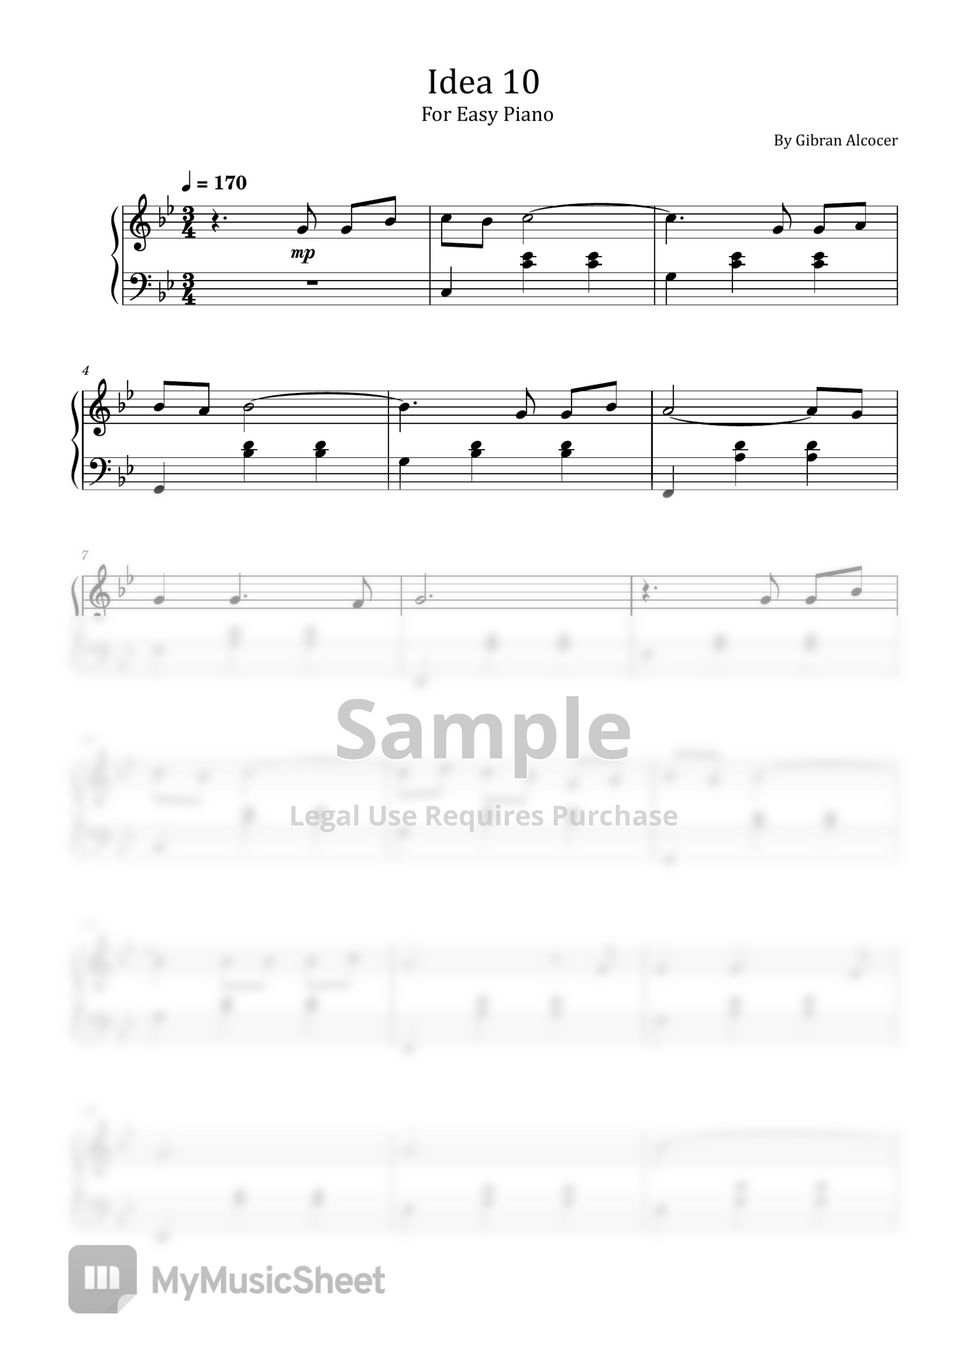 Gibran Alcocer - Idea 10 (For Easy Piano) Sheets by poon